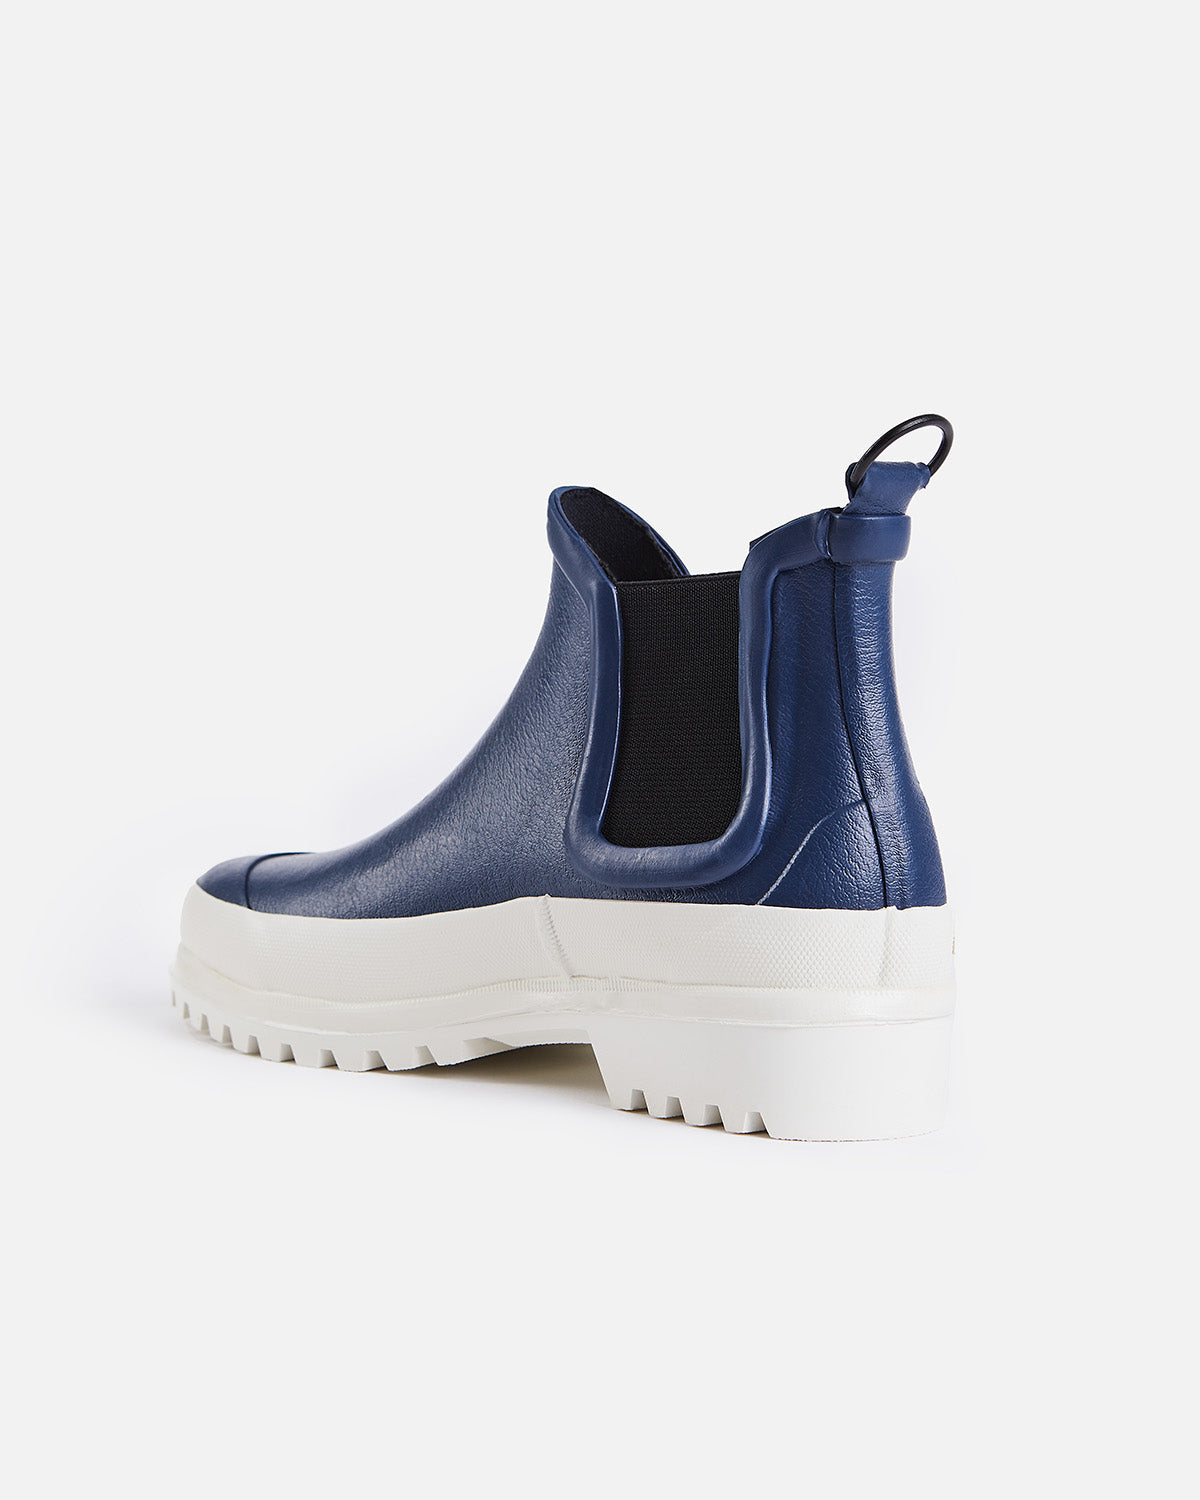 Chelsea Rainboots in color navy with white sole by Ilse Jacobsen